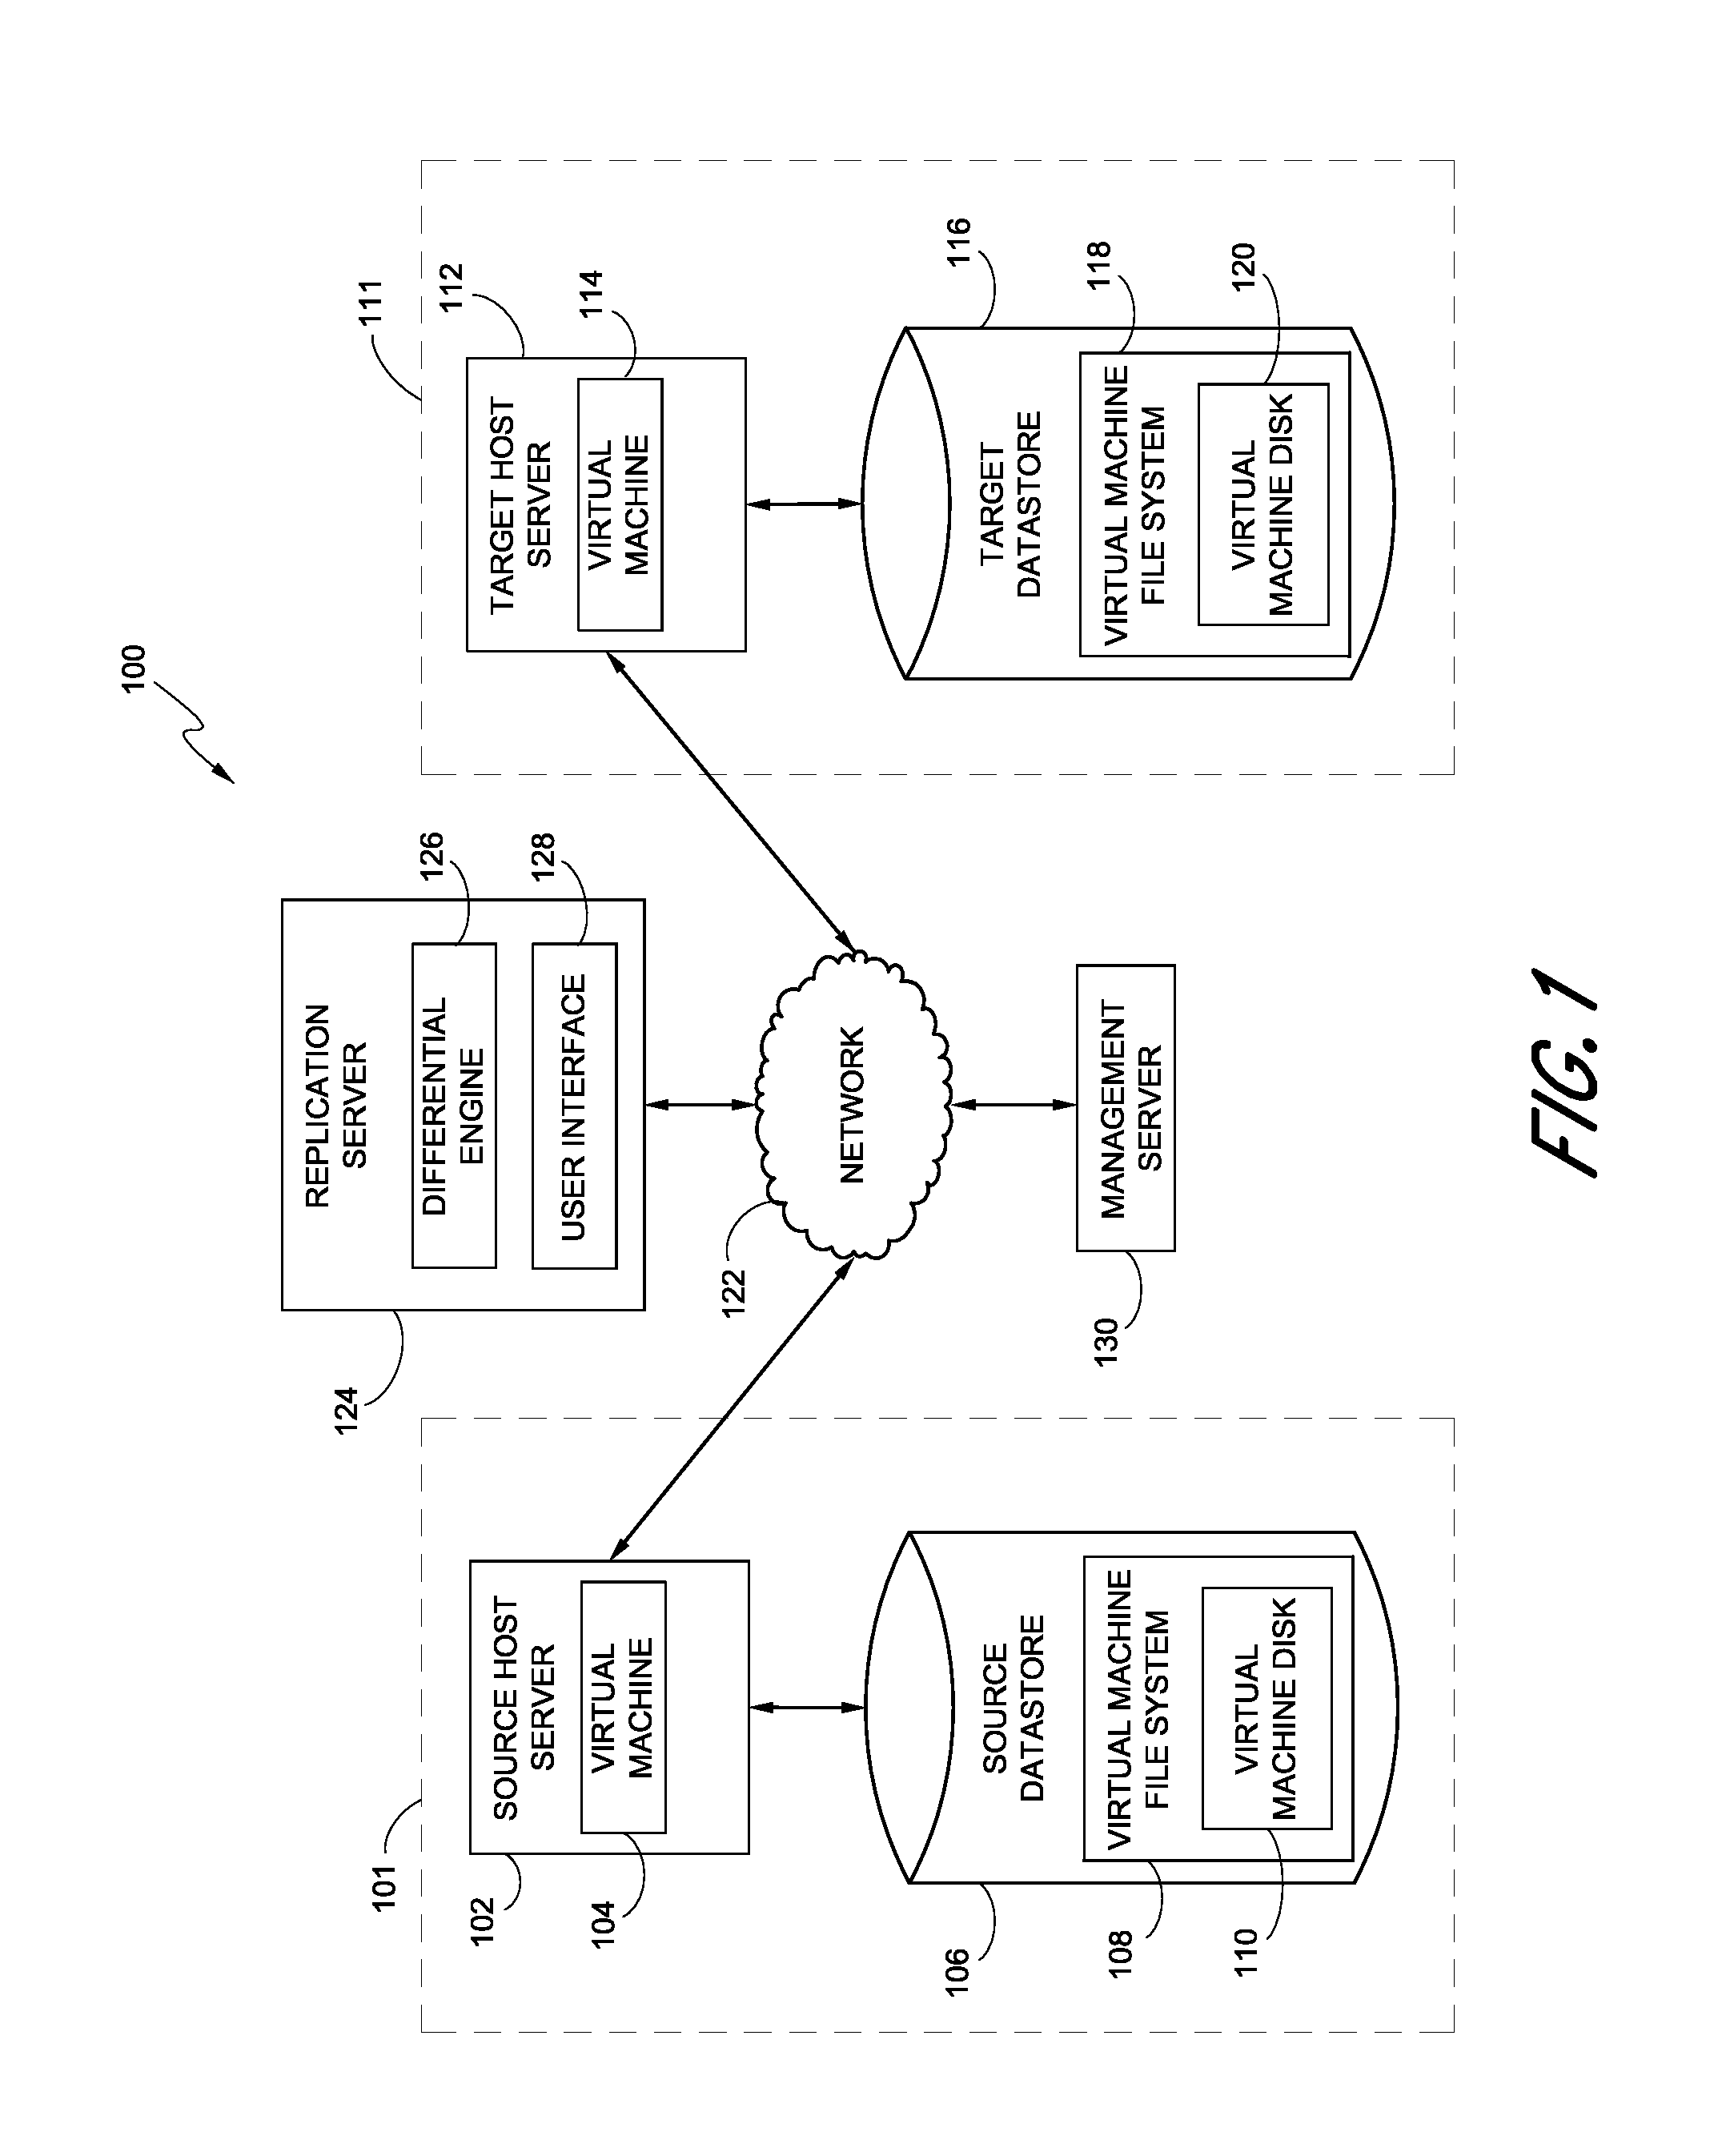 Replication systems and methods for a virtual computing environment